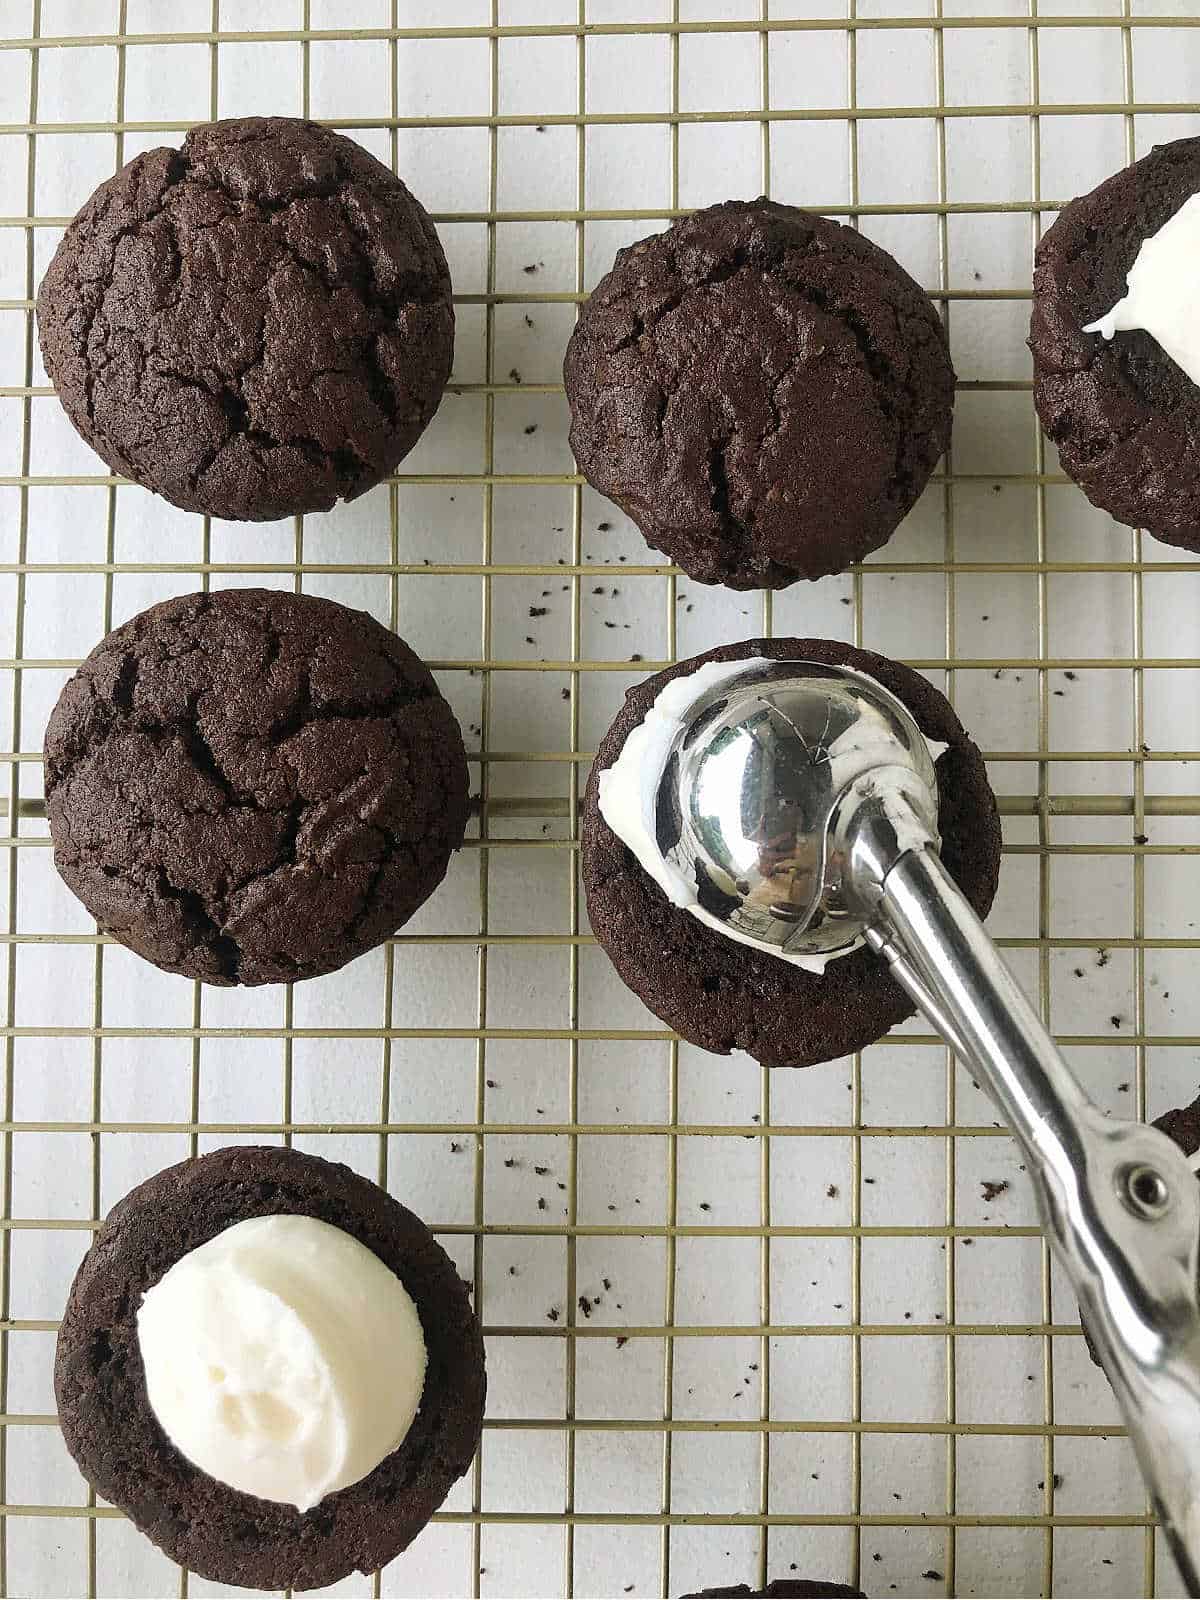 Scooping cream cheese filling on chocolate whoopie pie half on a wire rack.